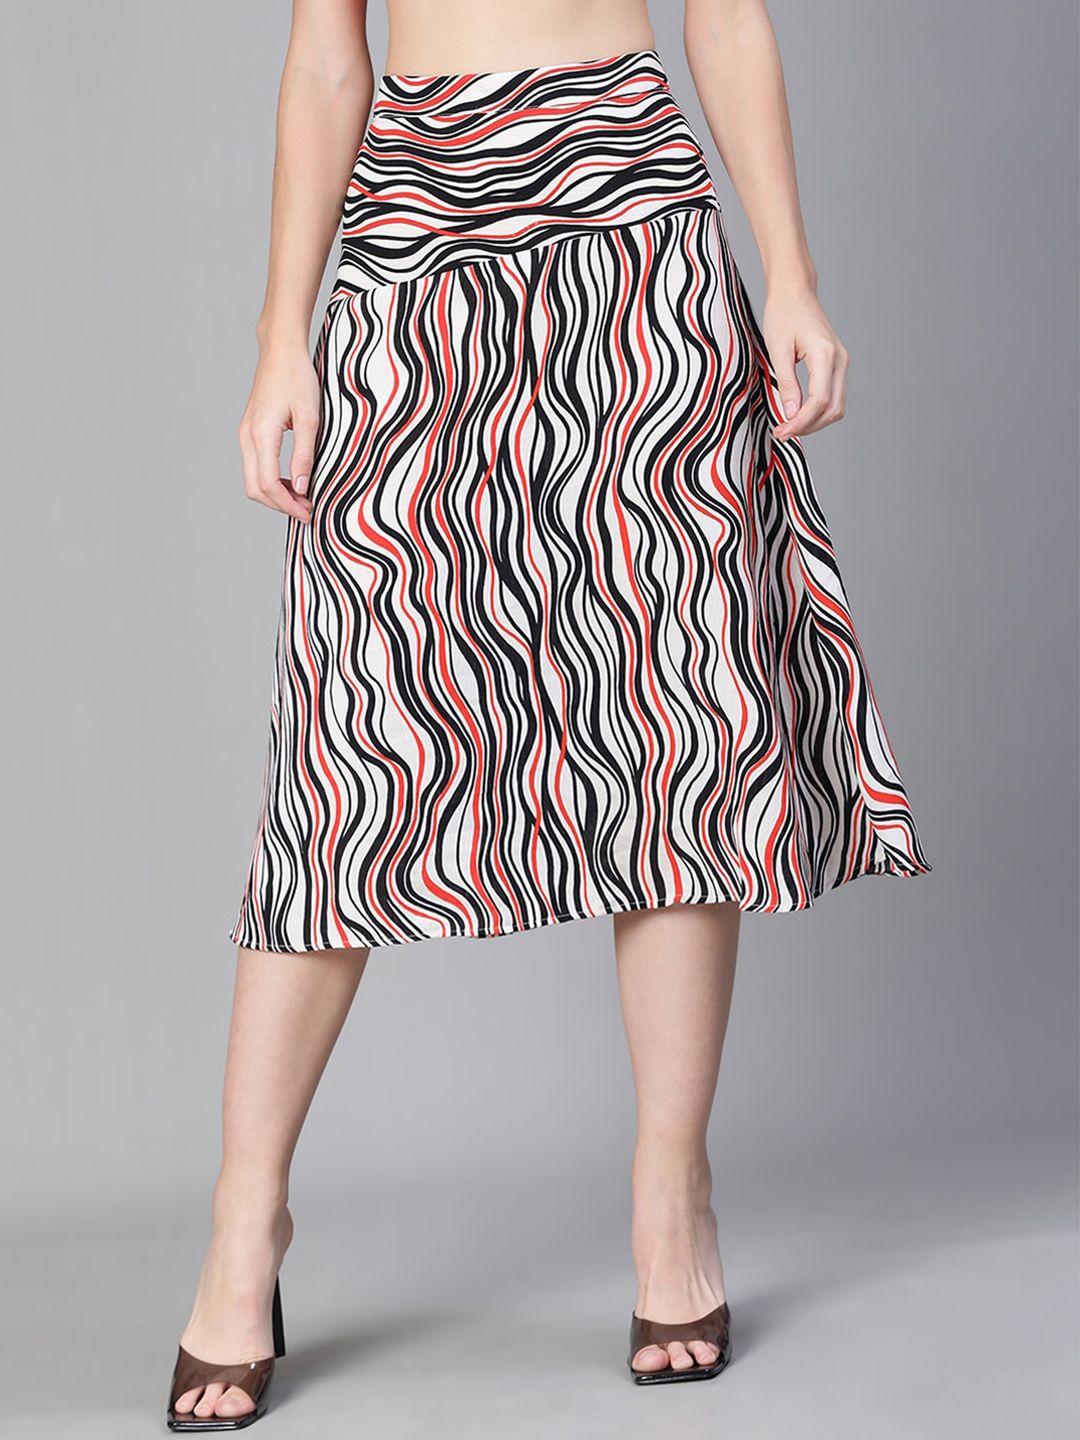 oxolloxo-layered-printed-a-line-flared-skirt